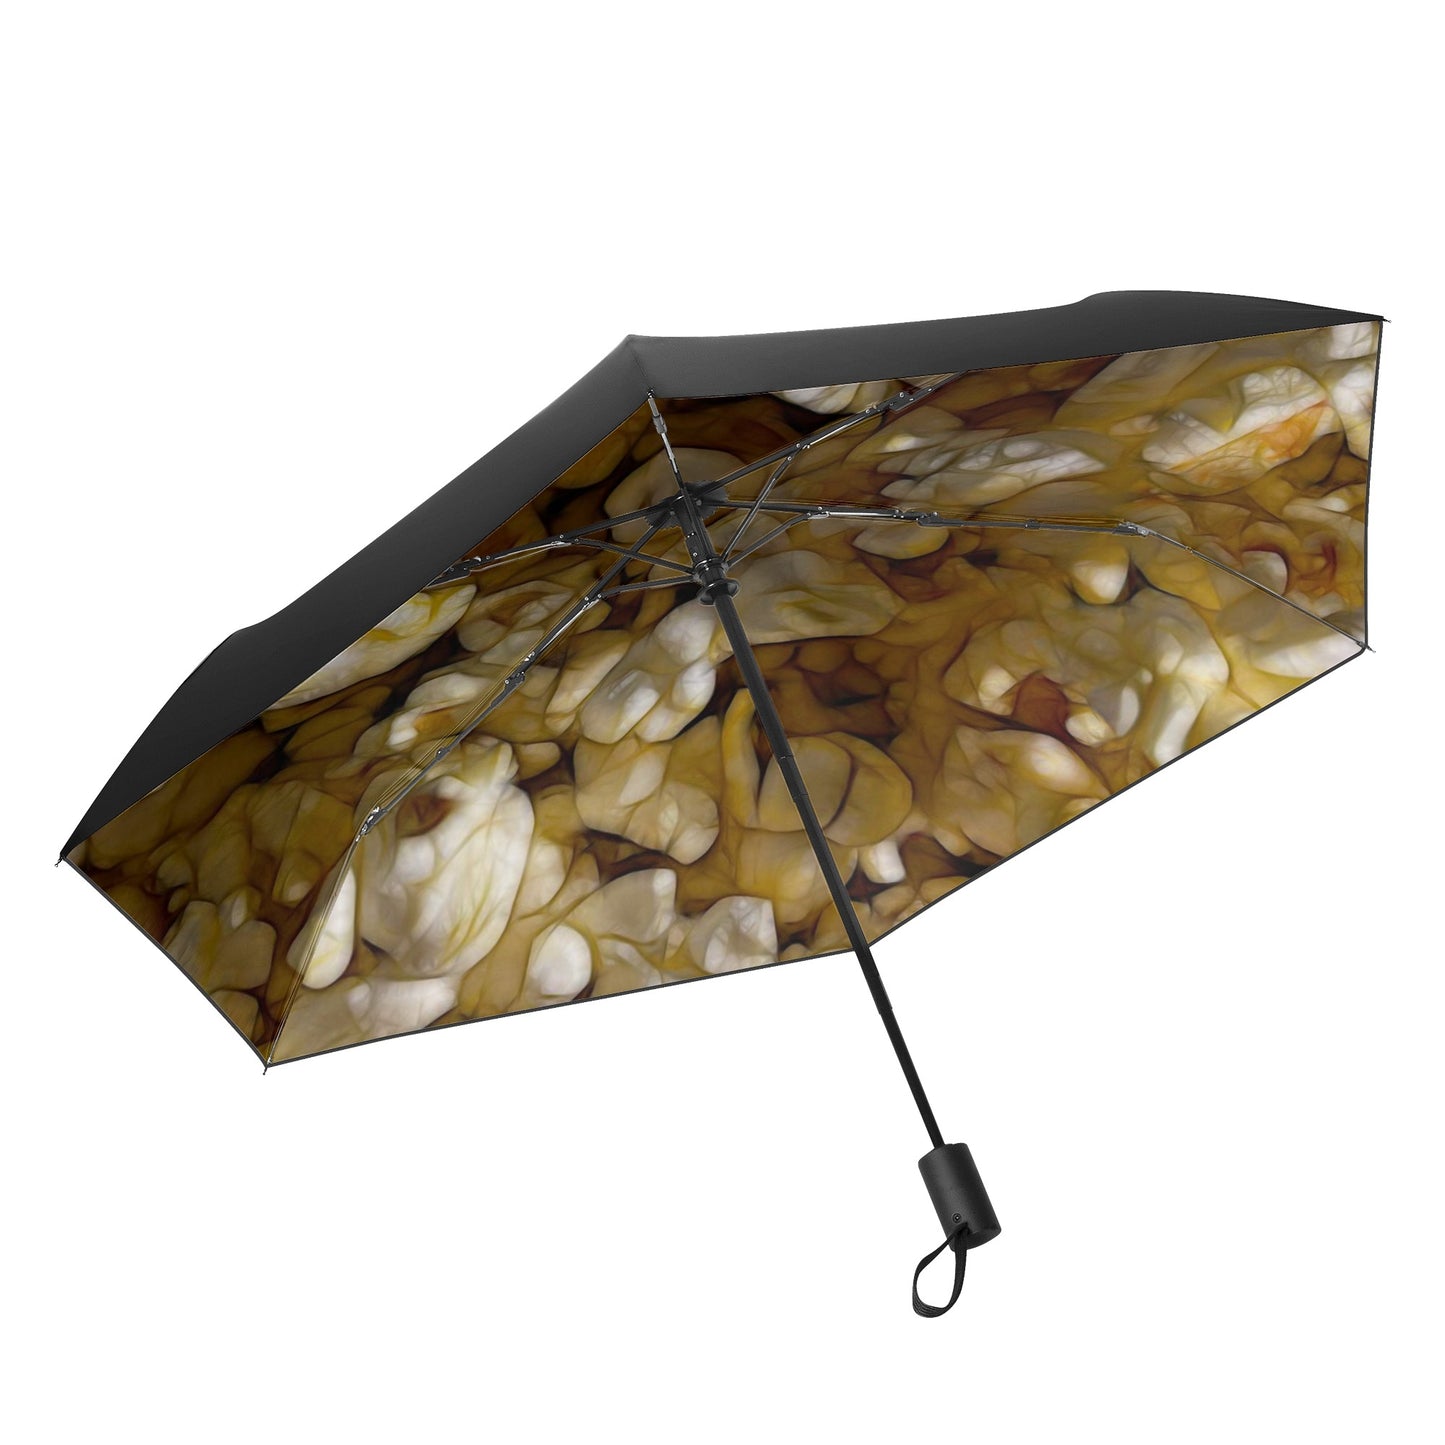 Buttered Popcorn Fully Auto Open & Close Umbrella Printing Inside